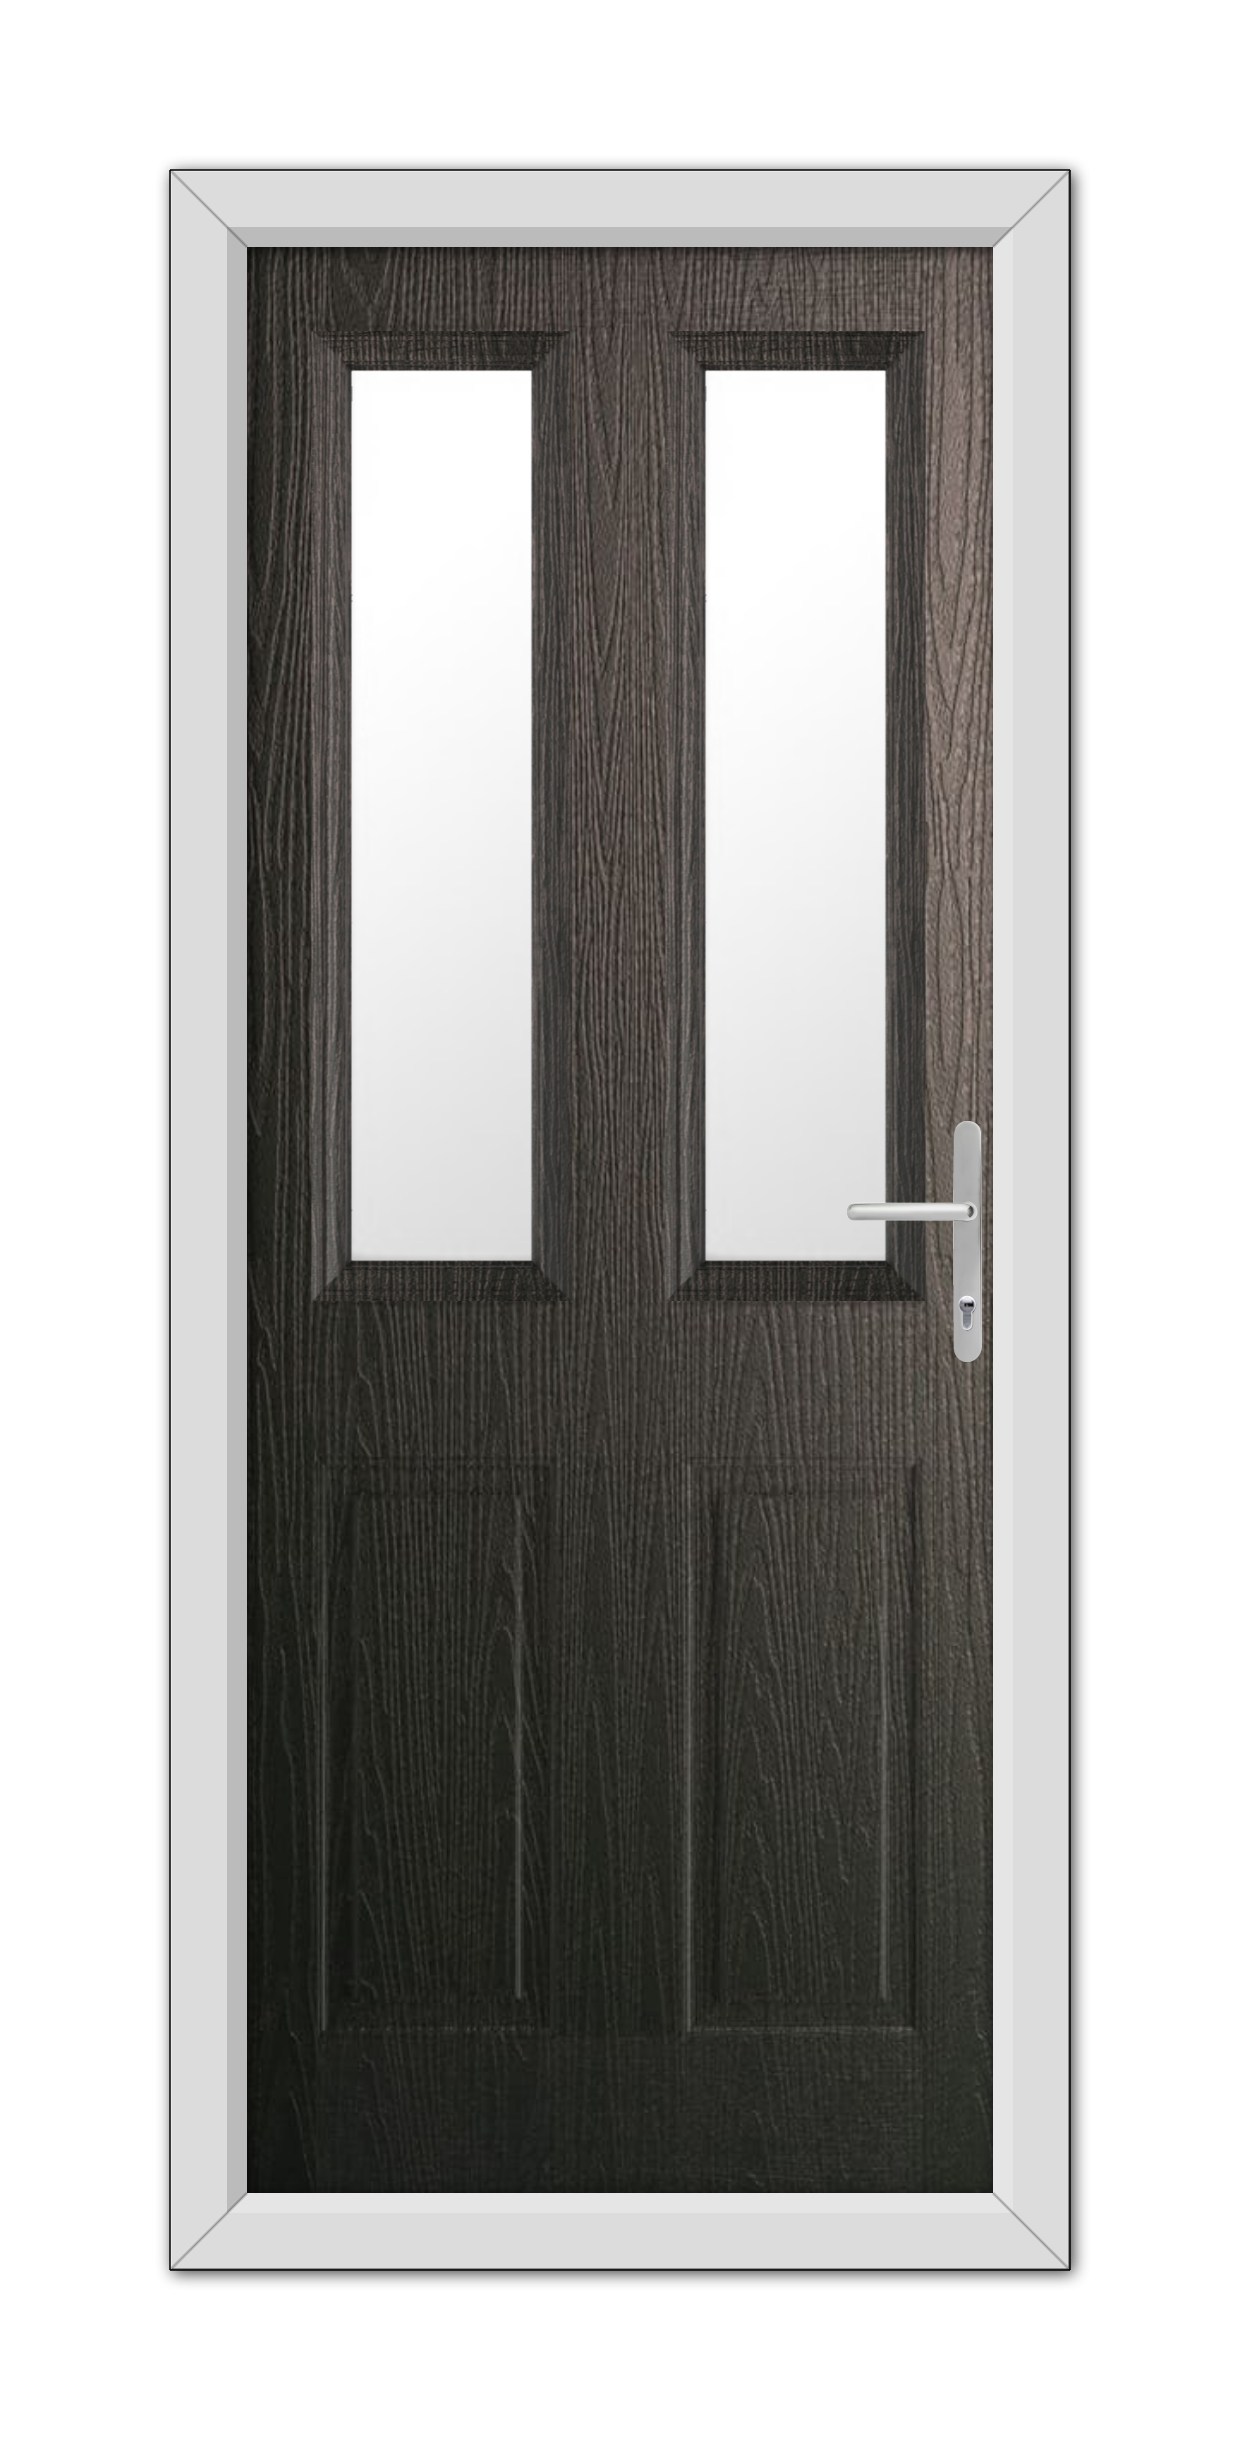 A modern Schwarzbraun Whitmore Composite Door 48mm Timber Core with a metallic handle and two vertical glass panels, set in a white frame, isolated on a white background.